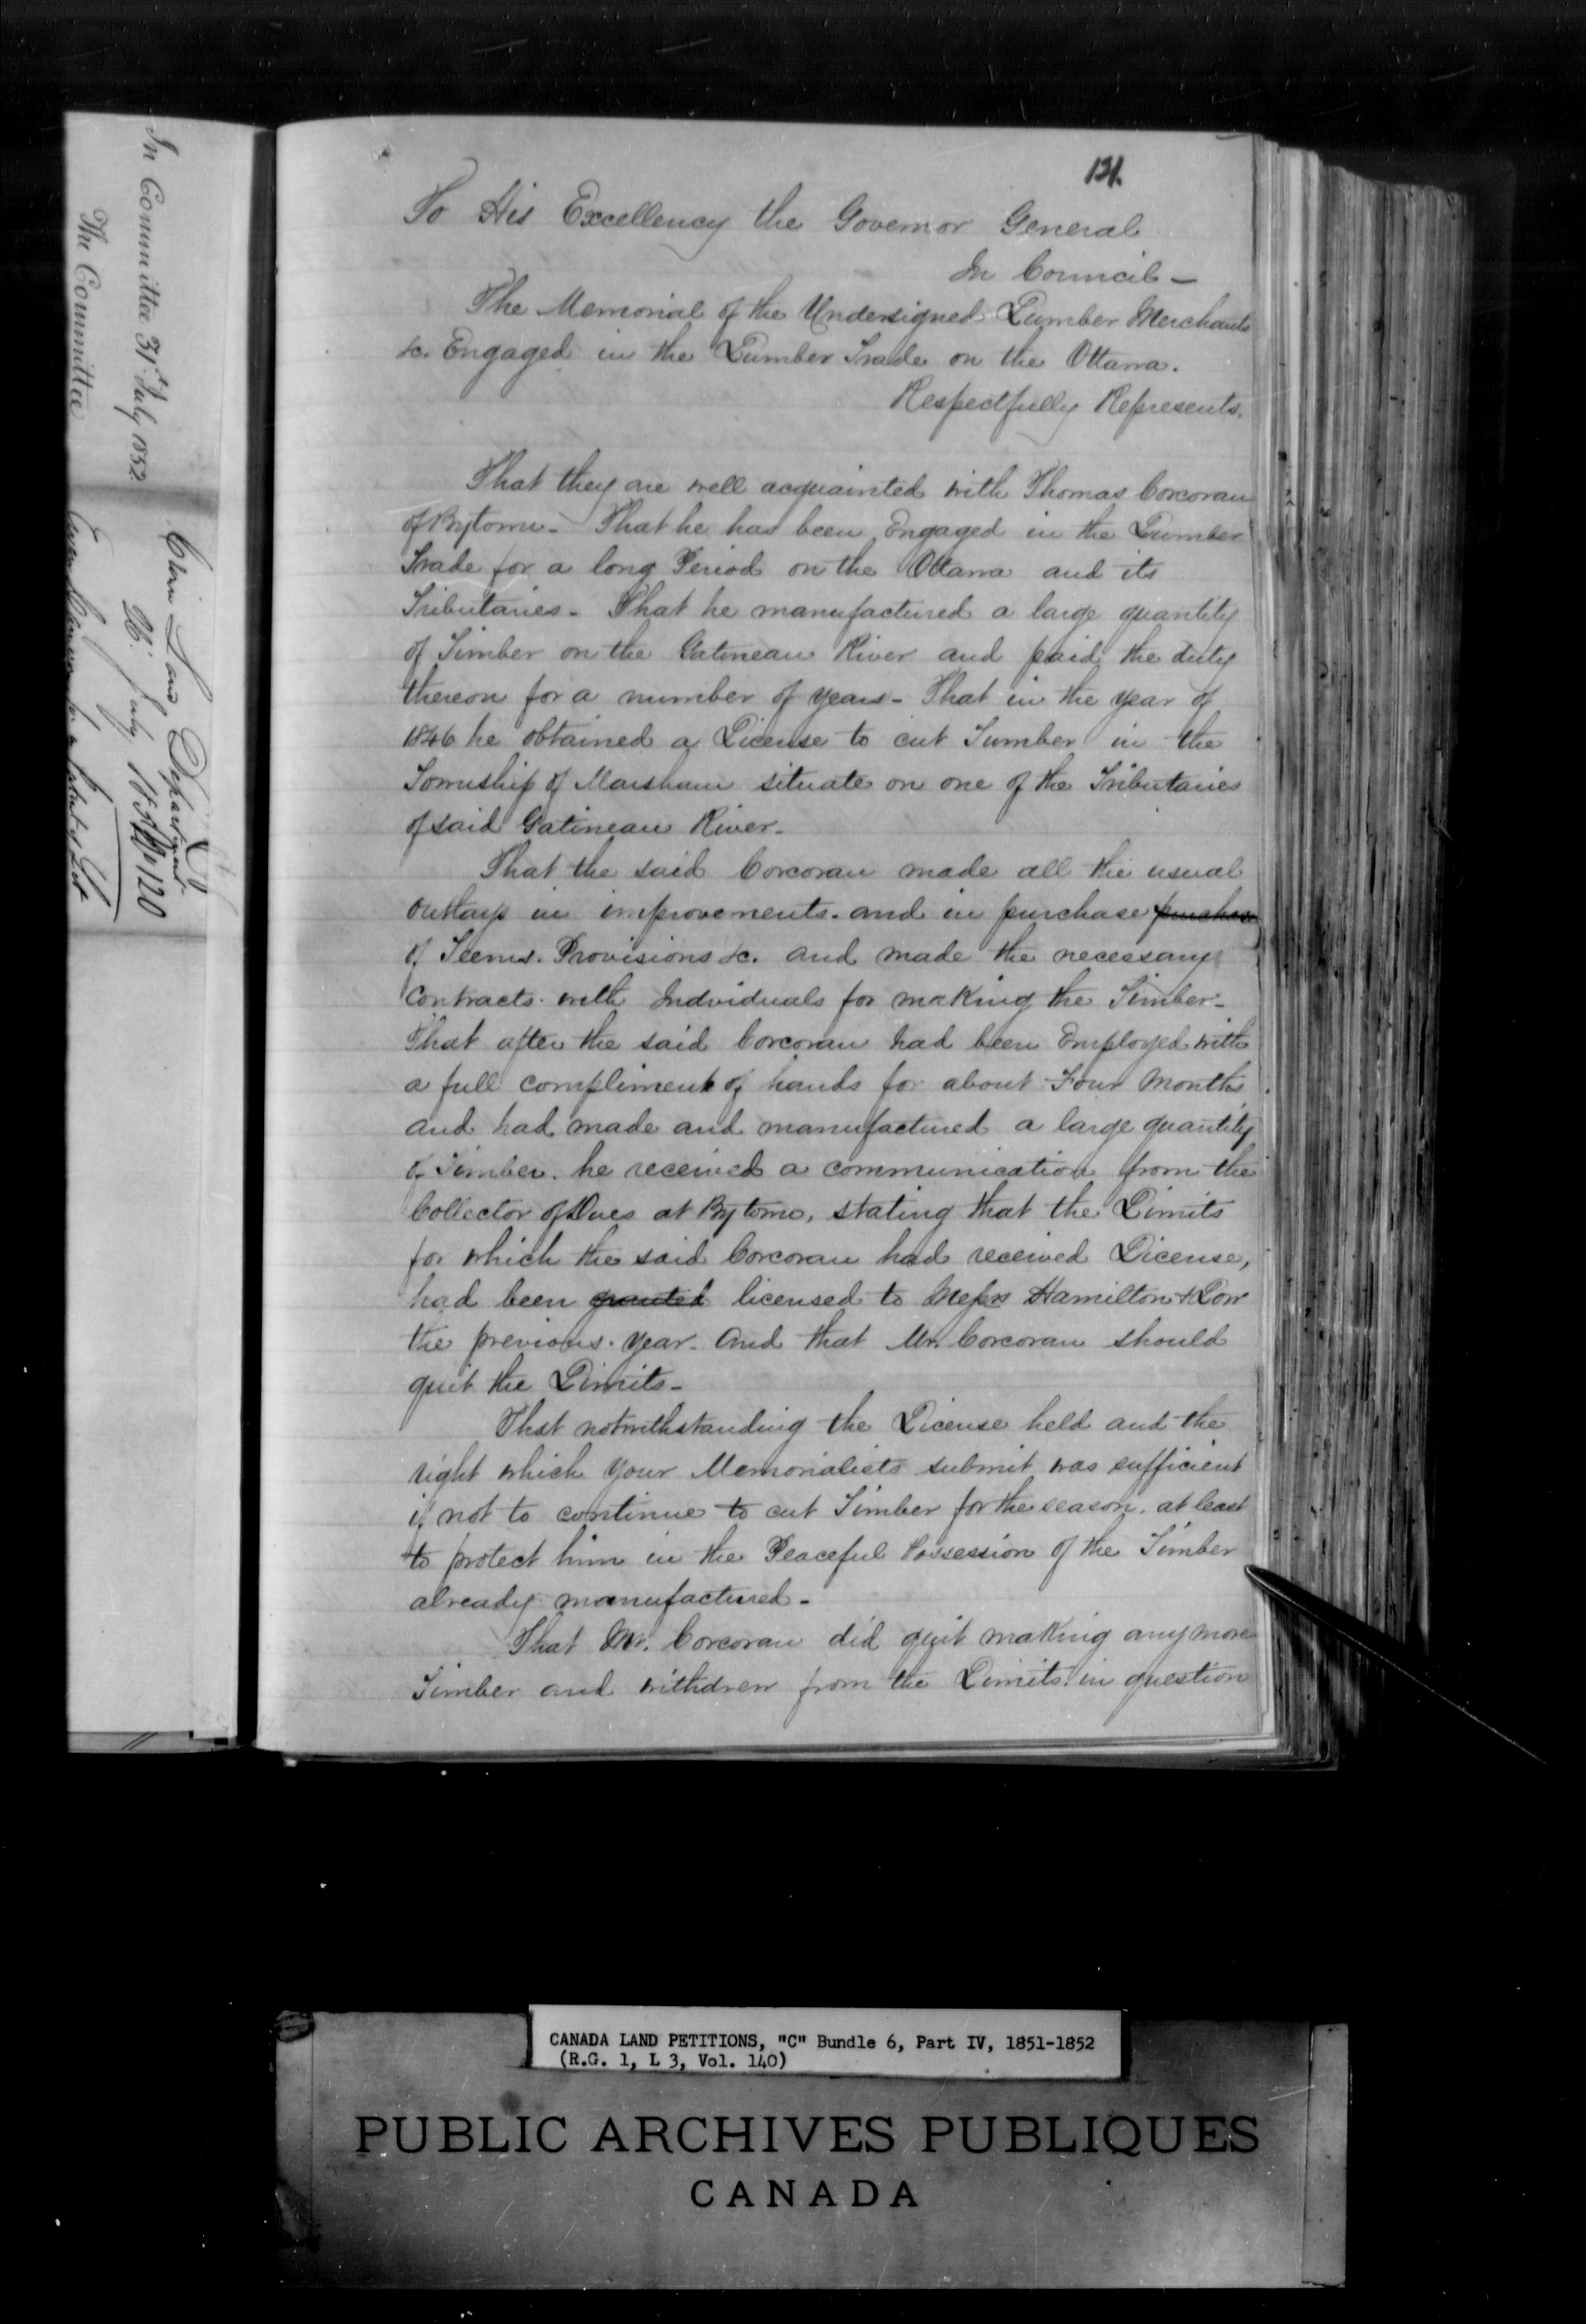 Title: Upper Canada Land Petitions (1763-1865) - Mikan Number: 205131 - Microform: c-1738